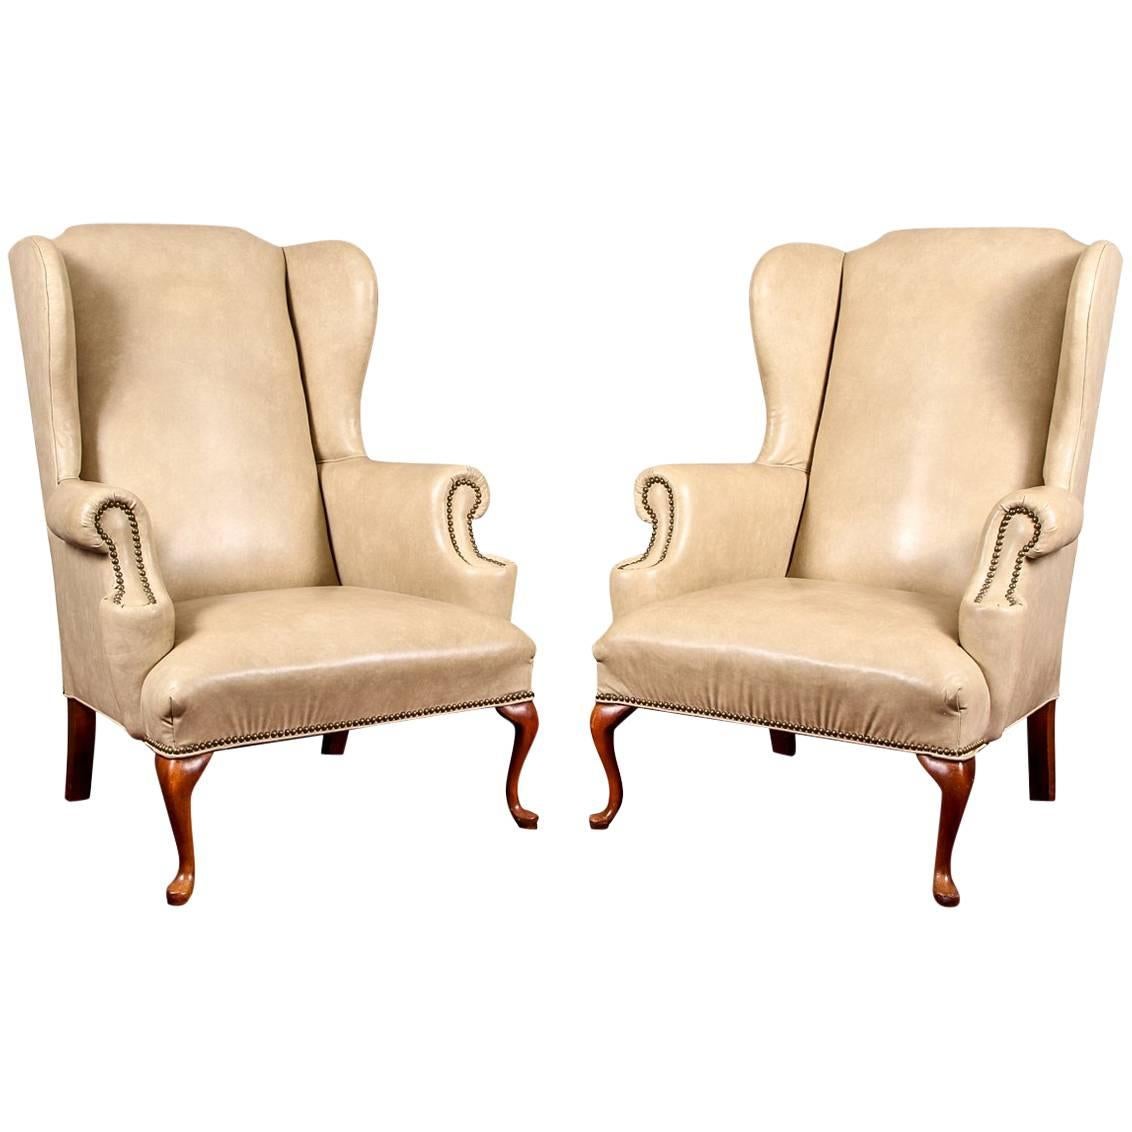 Pair of Tan Faux Leather Wing Chairs